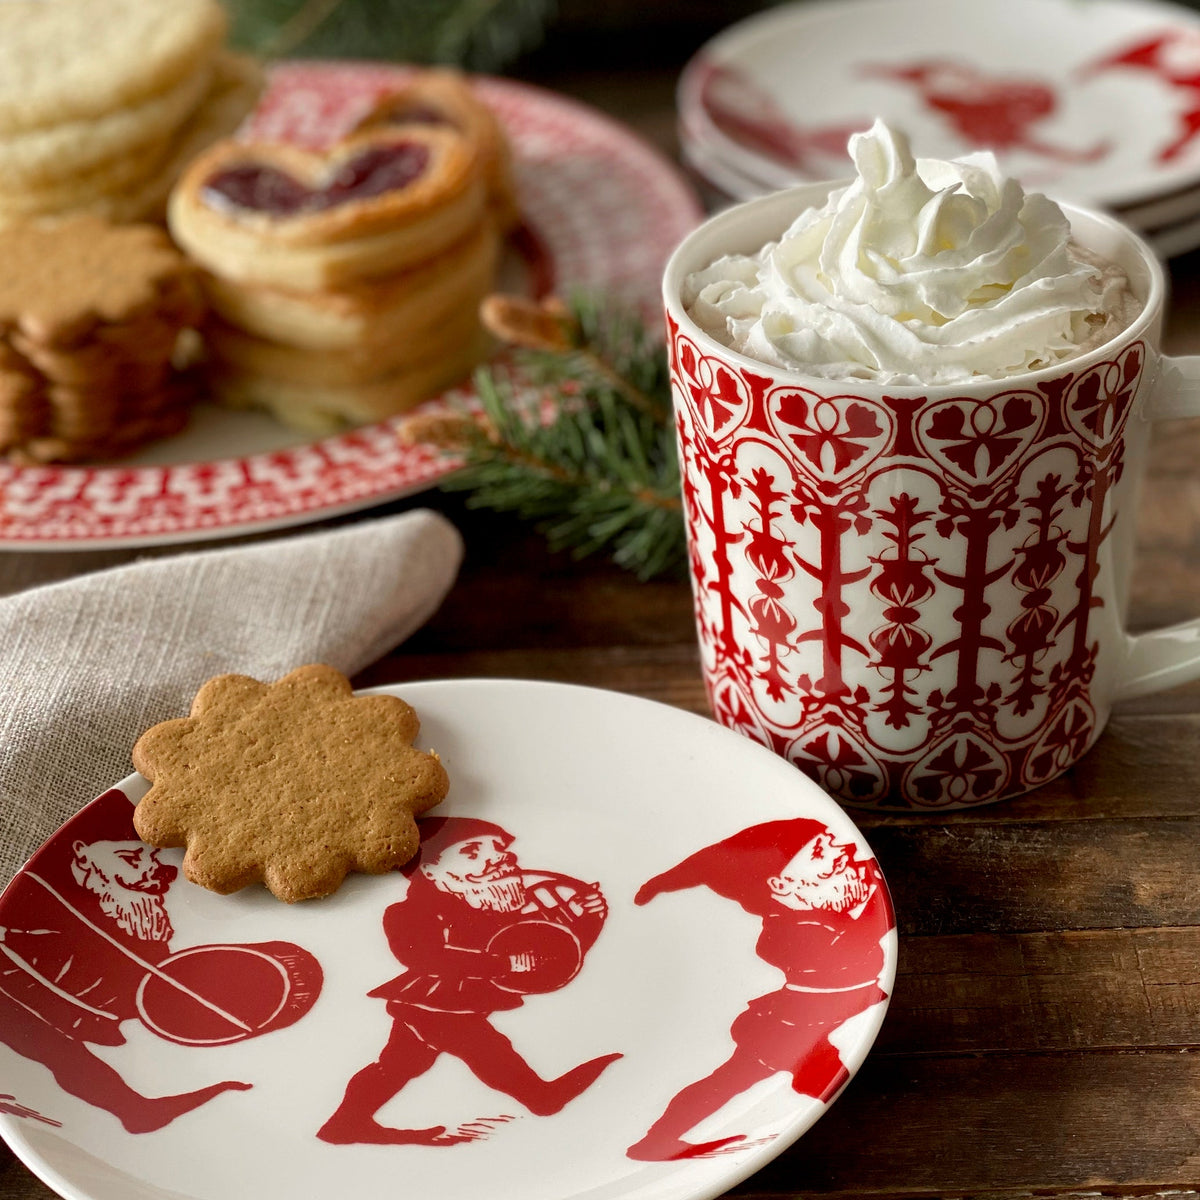 A holiday-themed table setting with a gingerbread cookie on a plate, a mug of whipped cream-topped hot beverage, and a background of assorted cookies. Elves Small Plates by Caskata Artisanal Home from our holiday collection feature festive red designs, making your table an entertaining powerhouse perfect for any gathering.